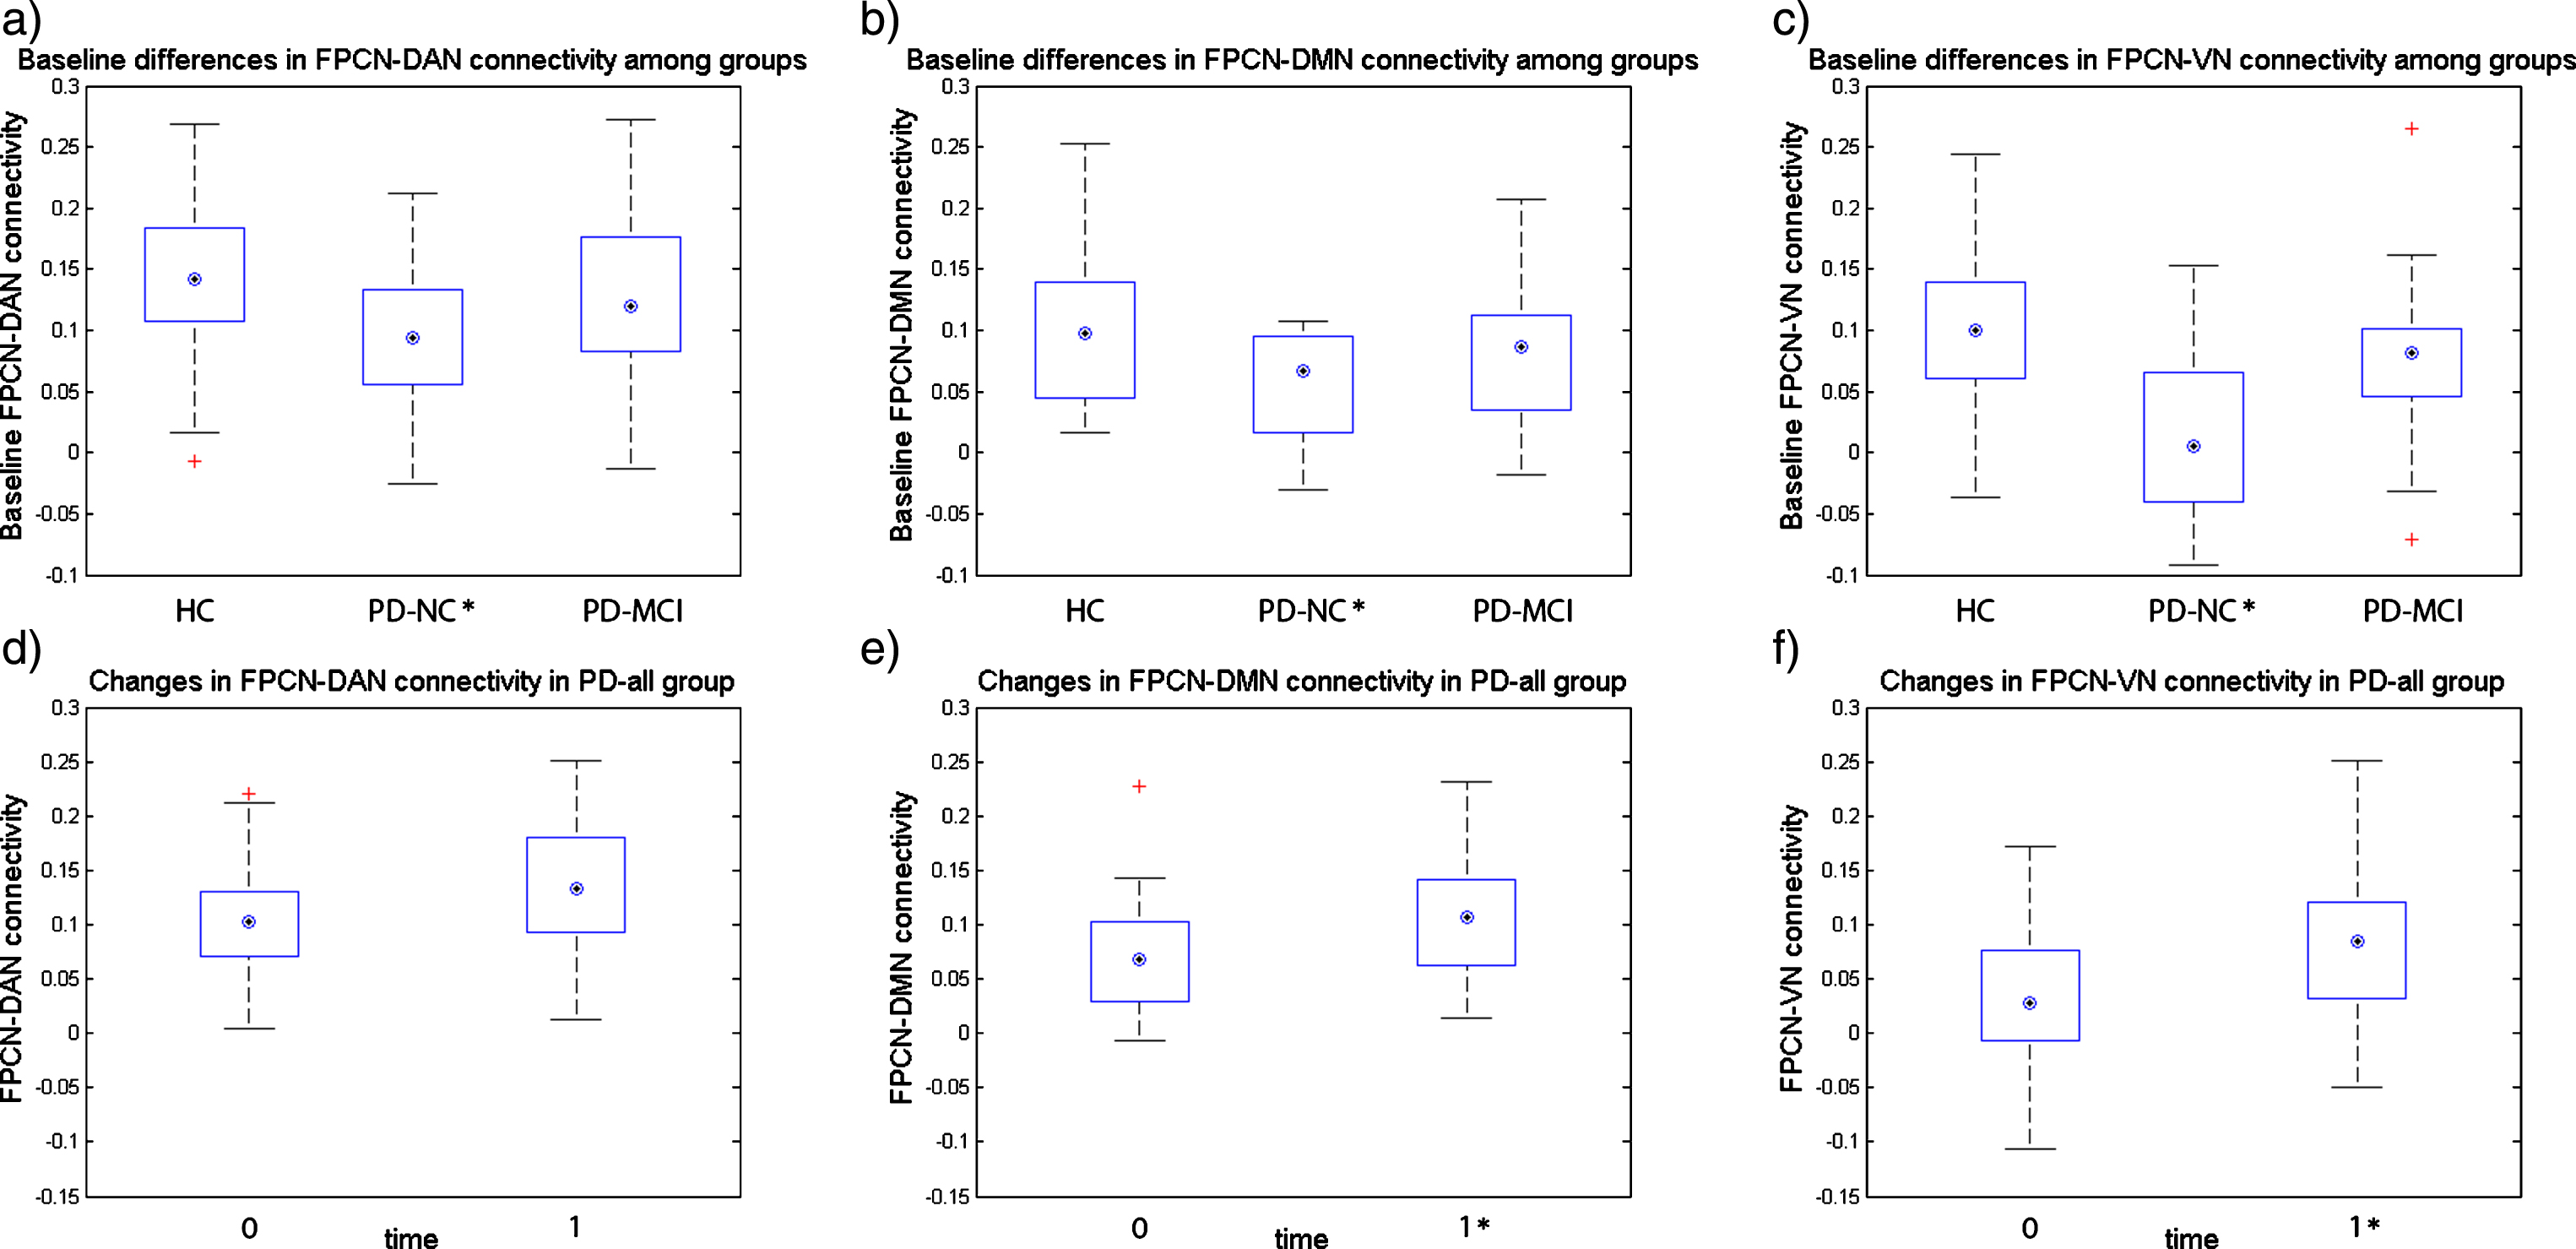 Baseline inter-network connectivity and longitudinal changes in HC and PD-all groups. Figure 2a-c shows the baseline differences in inter-network connectivity between groups, *marks the groups that significantly differ from the HC group in inter-network connectivity at p < 0.05; Figure 2d-f shows the changes in inter-network connectivity after one year in PD-all group (one-year follow-up visit – baseline visit), *marks the follow-up visit inter-network connectivity that significantly differs from the baseline visit at p < 0.05; on each box the central mark indicates the median, top and bottom box edges indicate the 25th and 75th percentiles, whiskers extend to the most extreme data points not considered outliers, and + marks outliers.